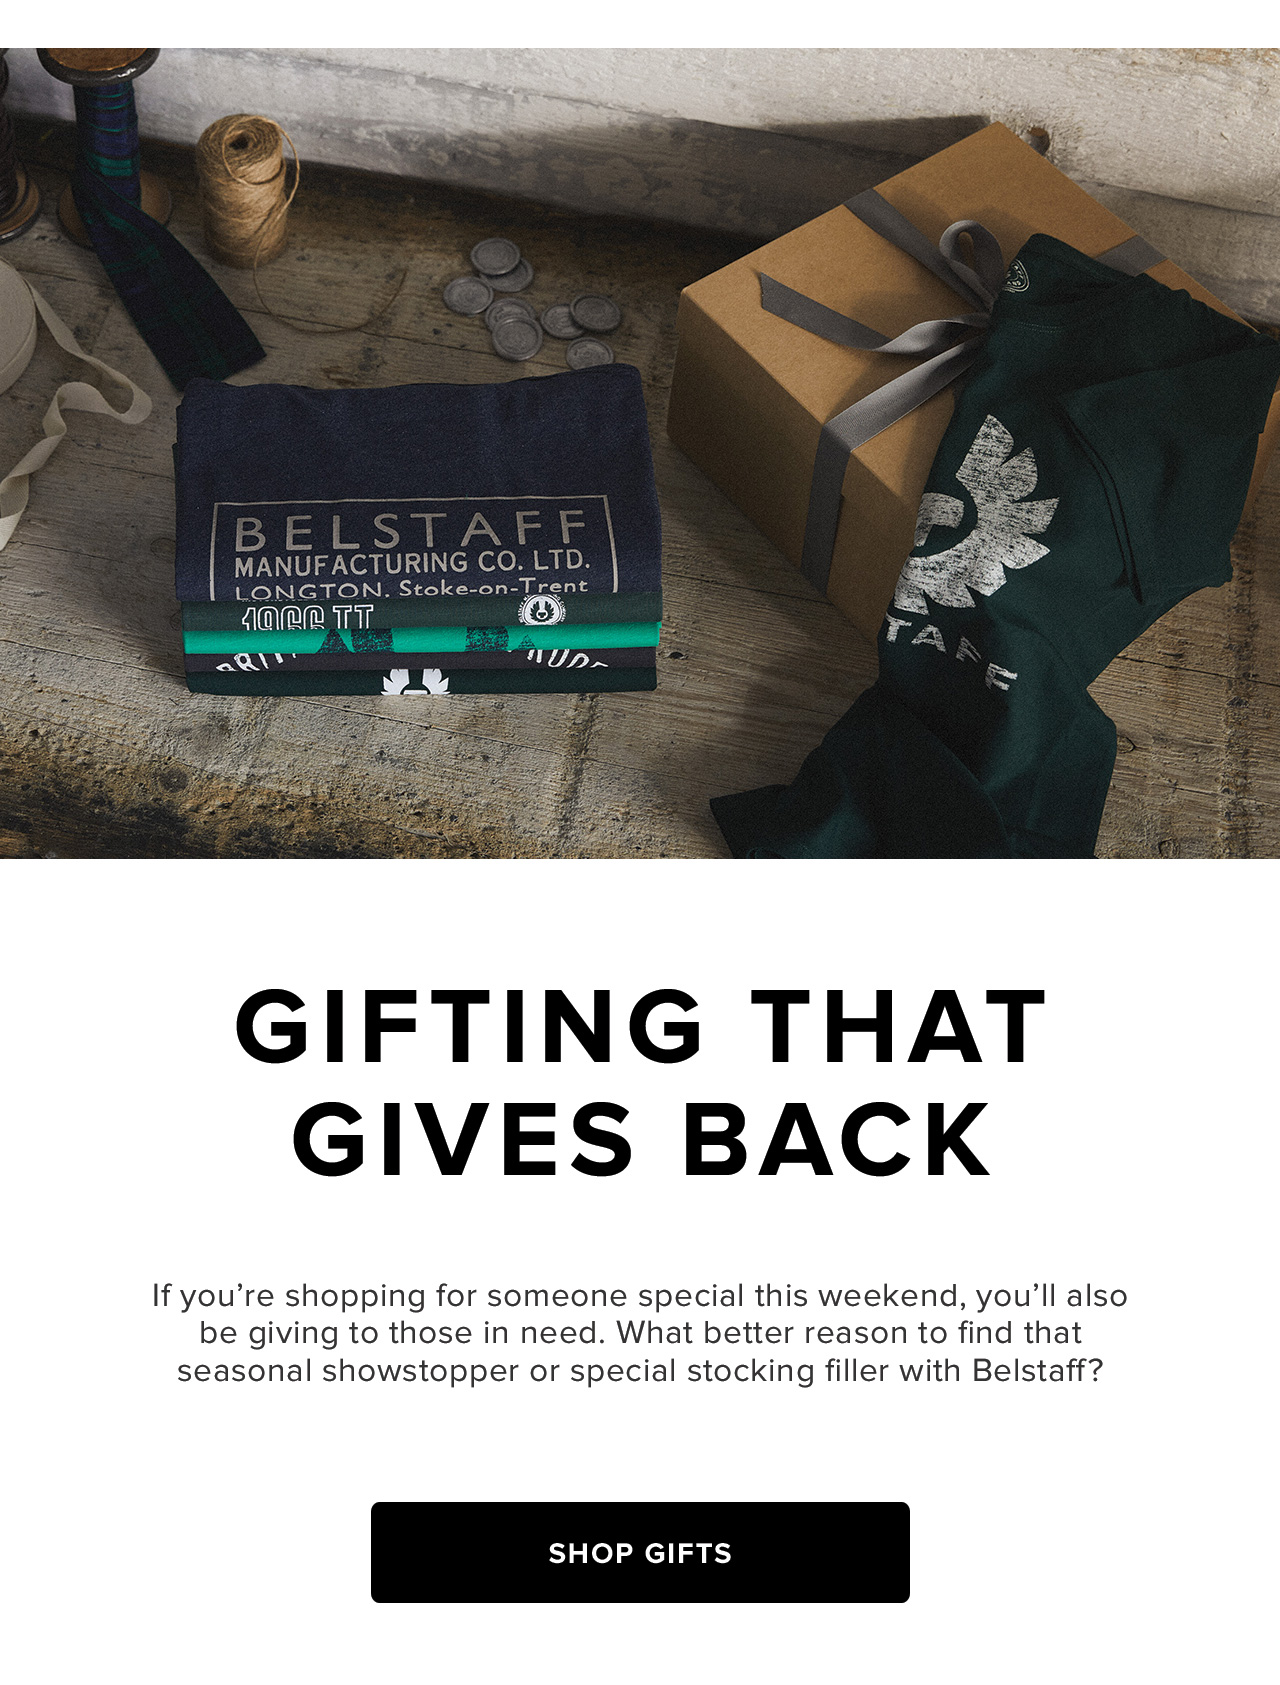 If you're shopping for someone special this weekend, you'll also be giving to those in need. What better reason to find that seasonal showstopper or special stocking filler with Belstaff?